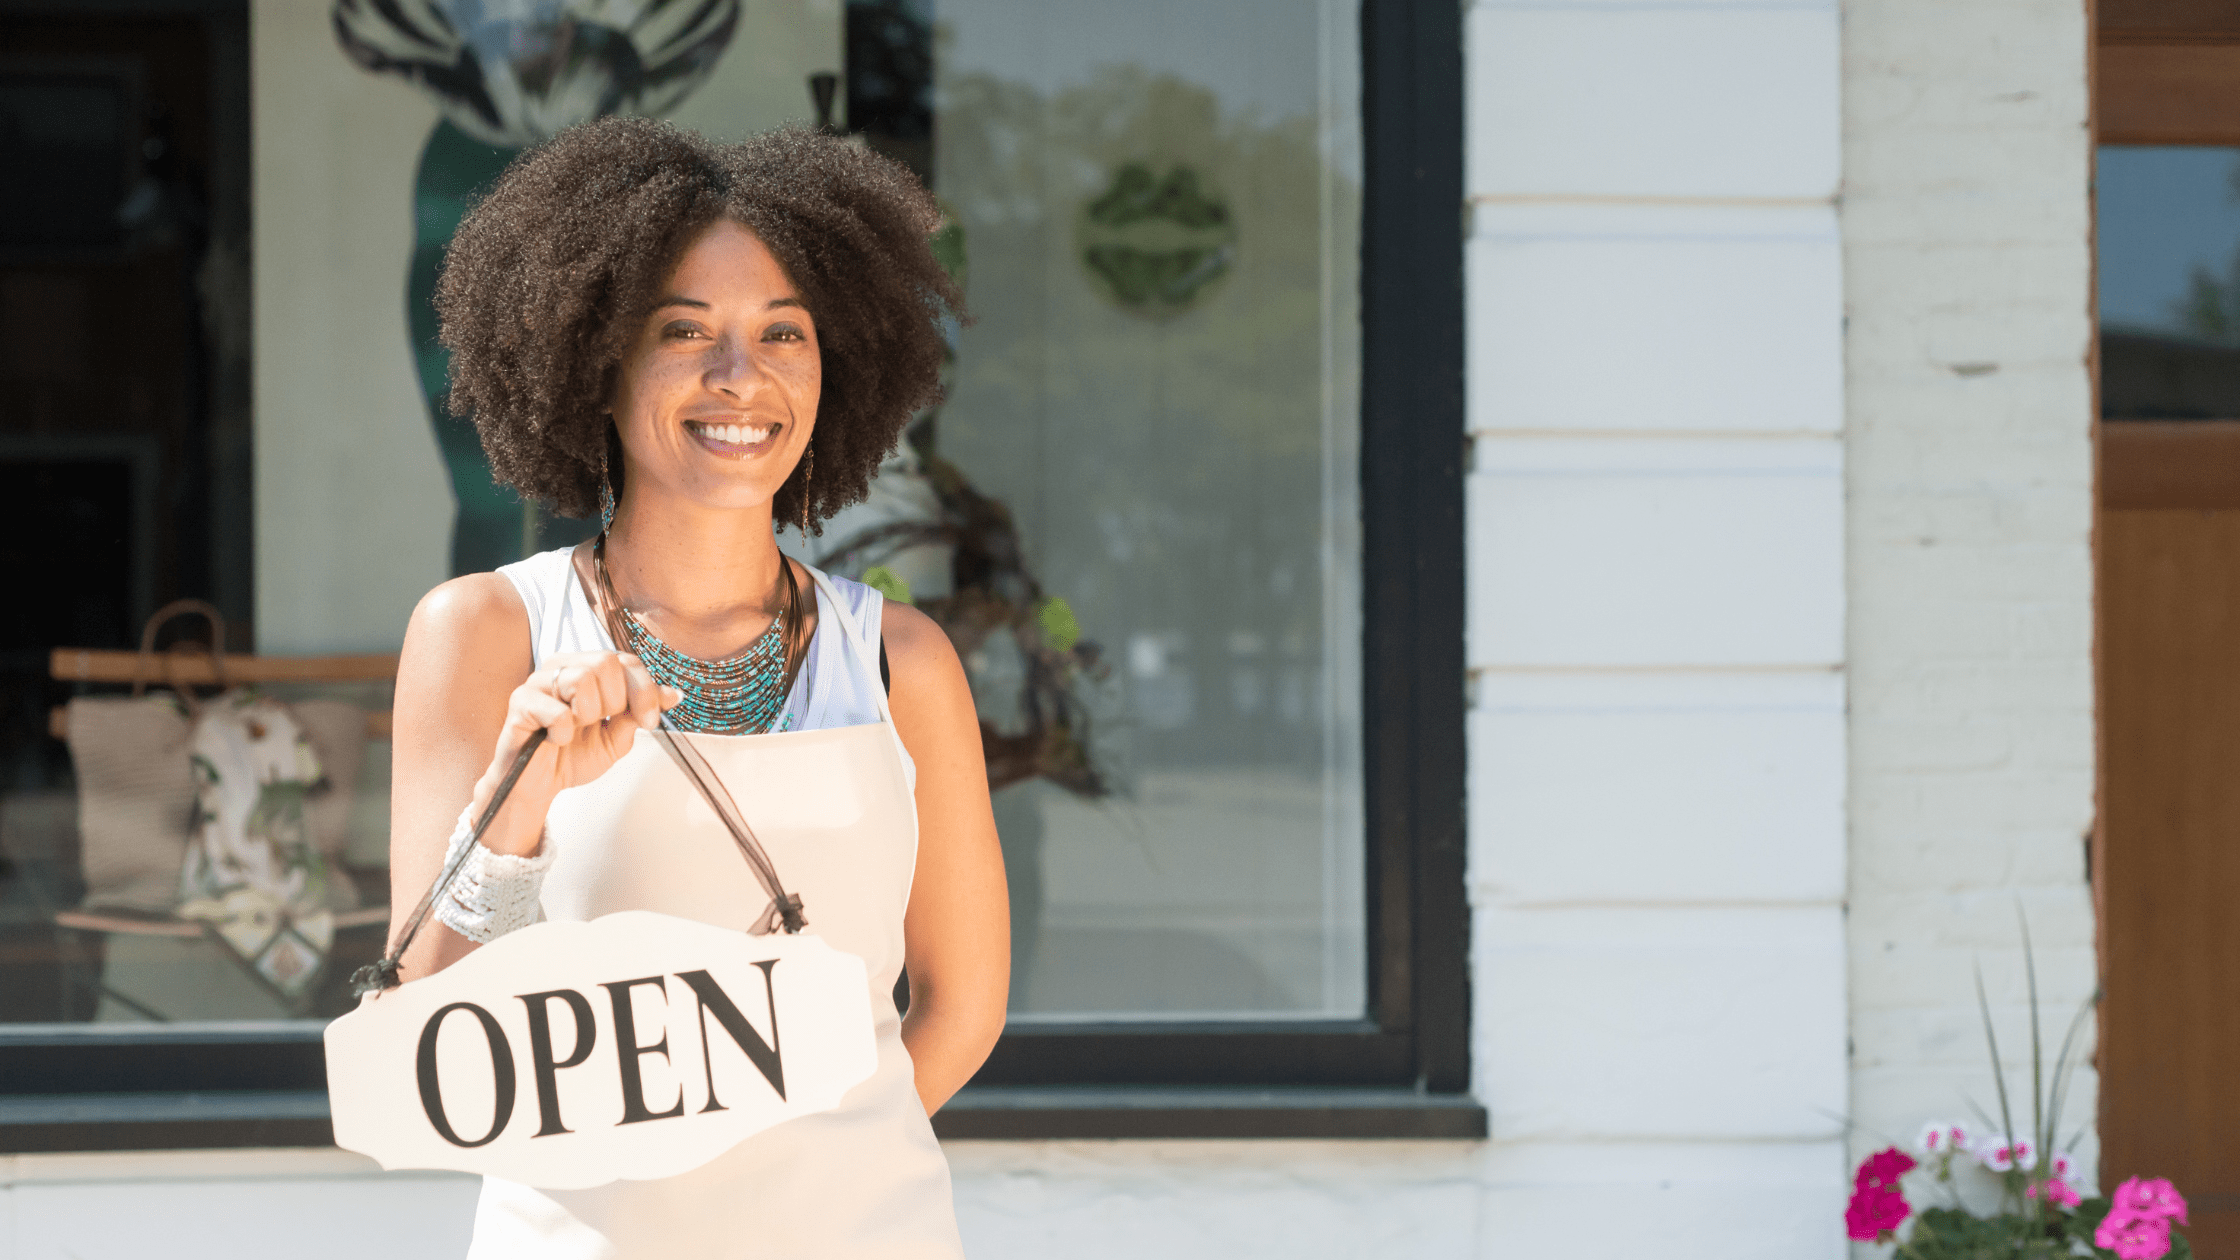 How to Market a Rural Location Small Business